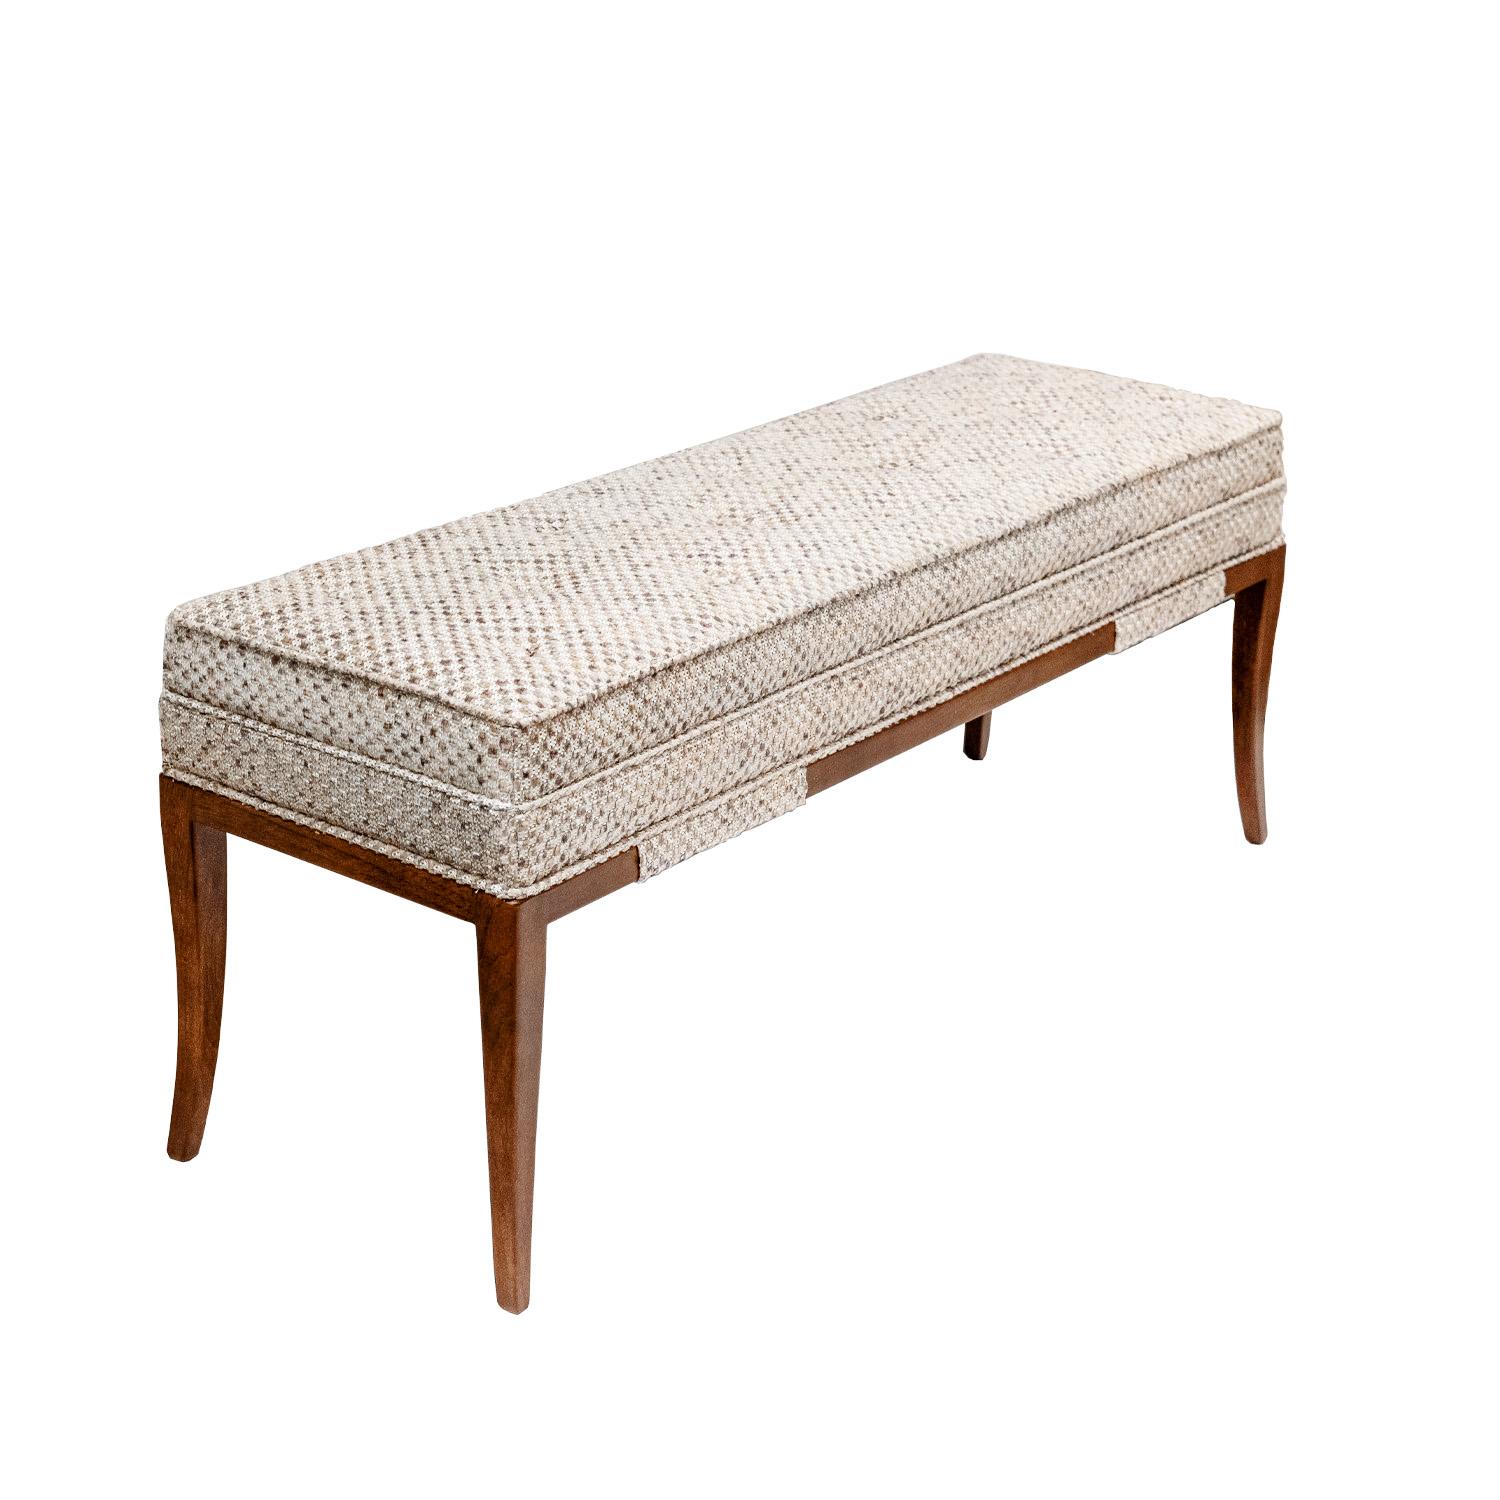 Mid-Century Modern Tommi Parzinger Elegant Upholstered Bench with Tapering Legs 1950s